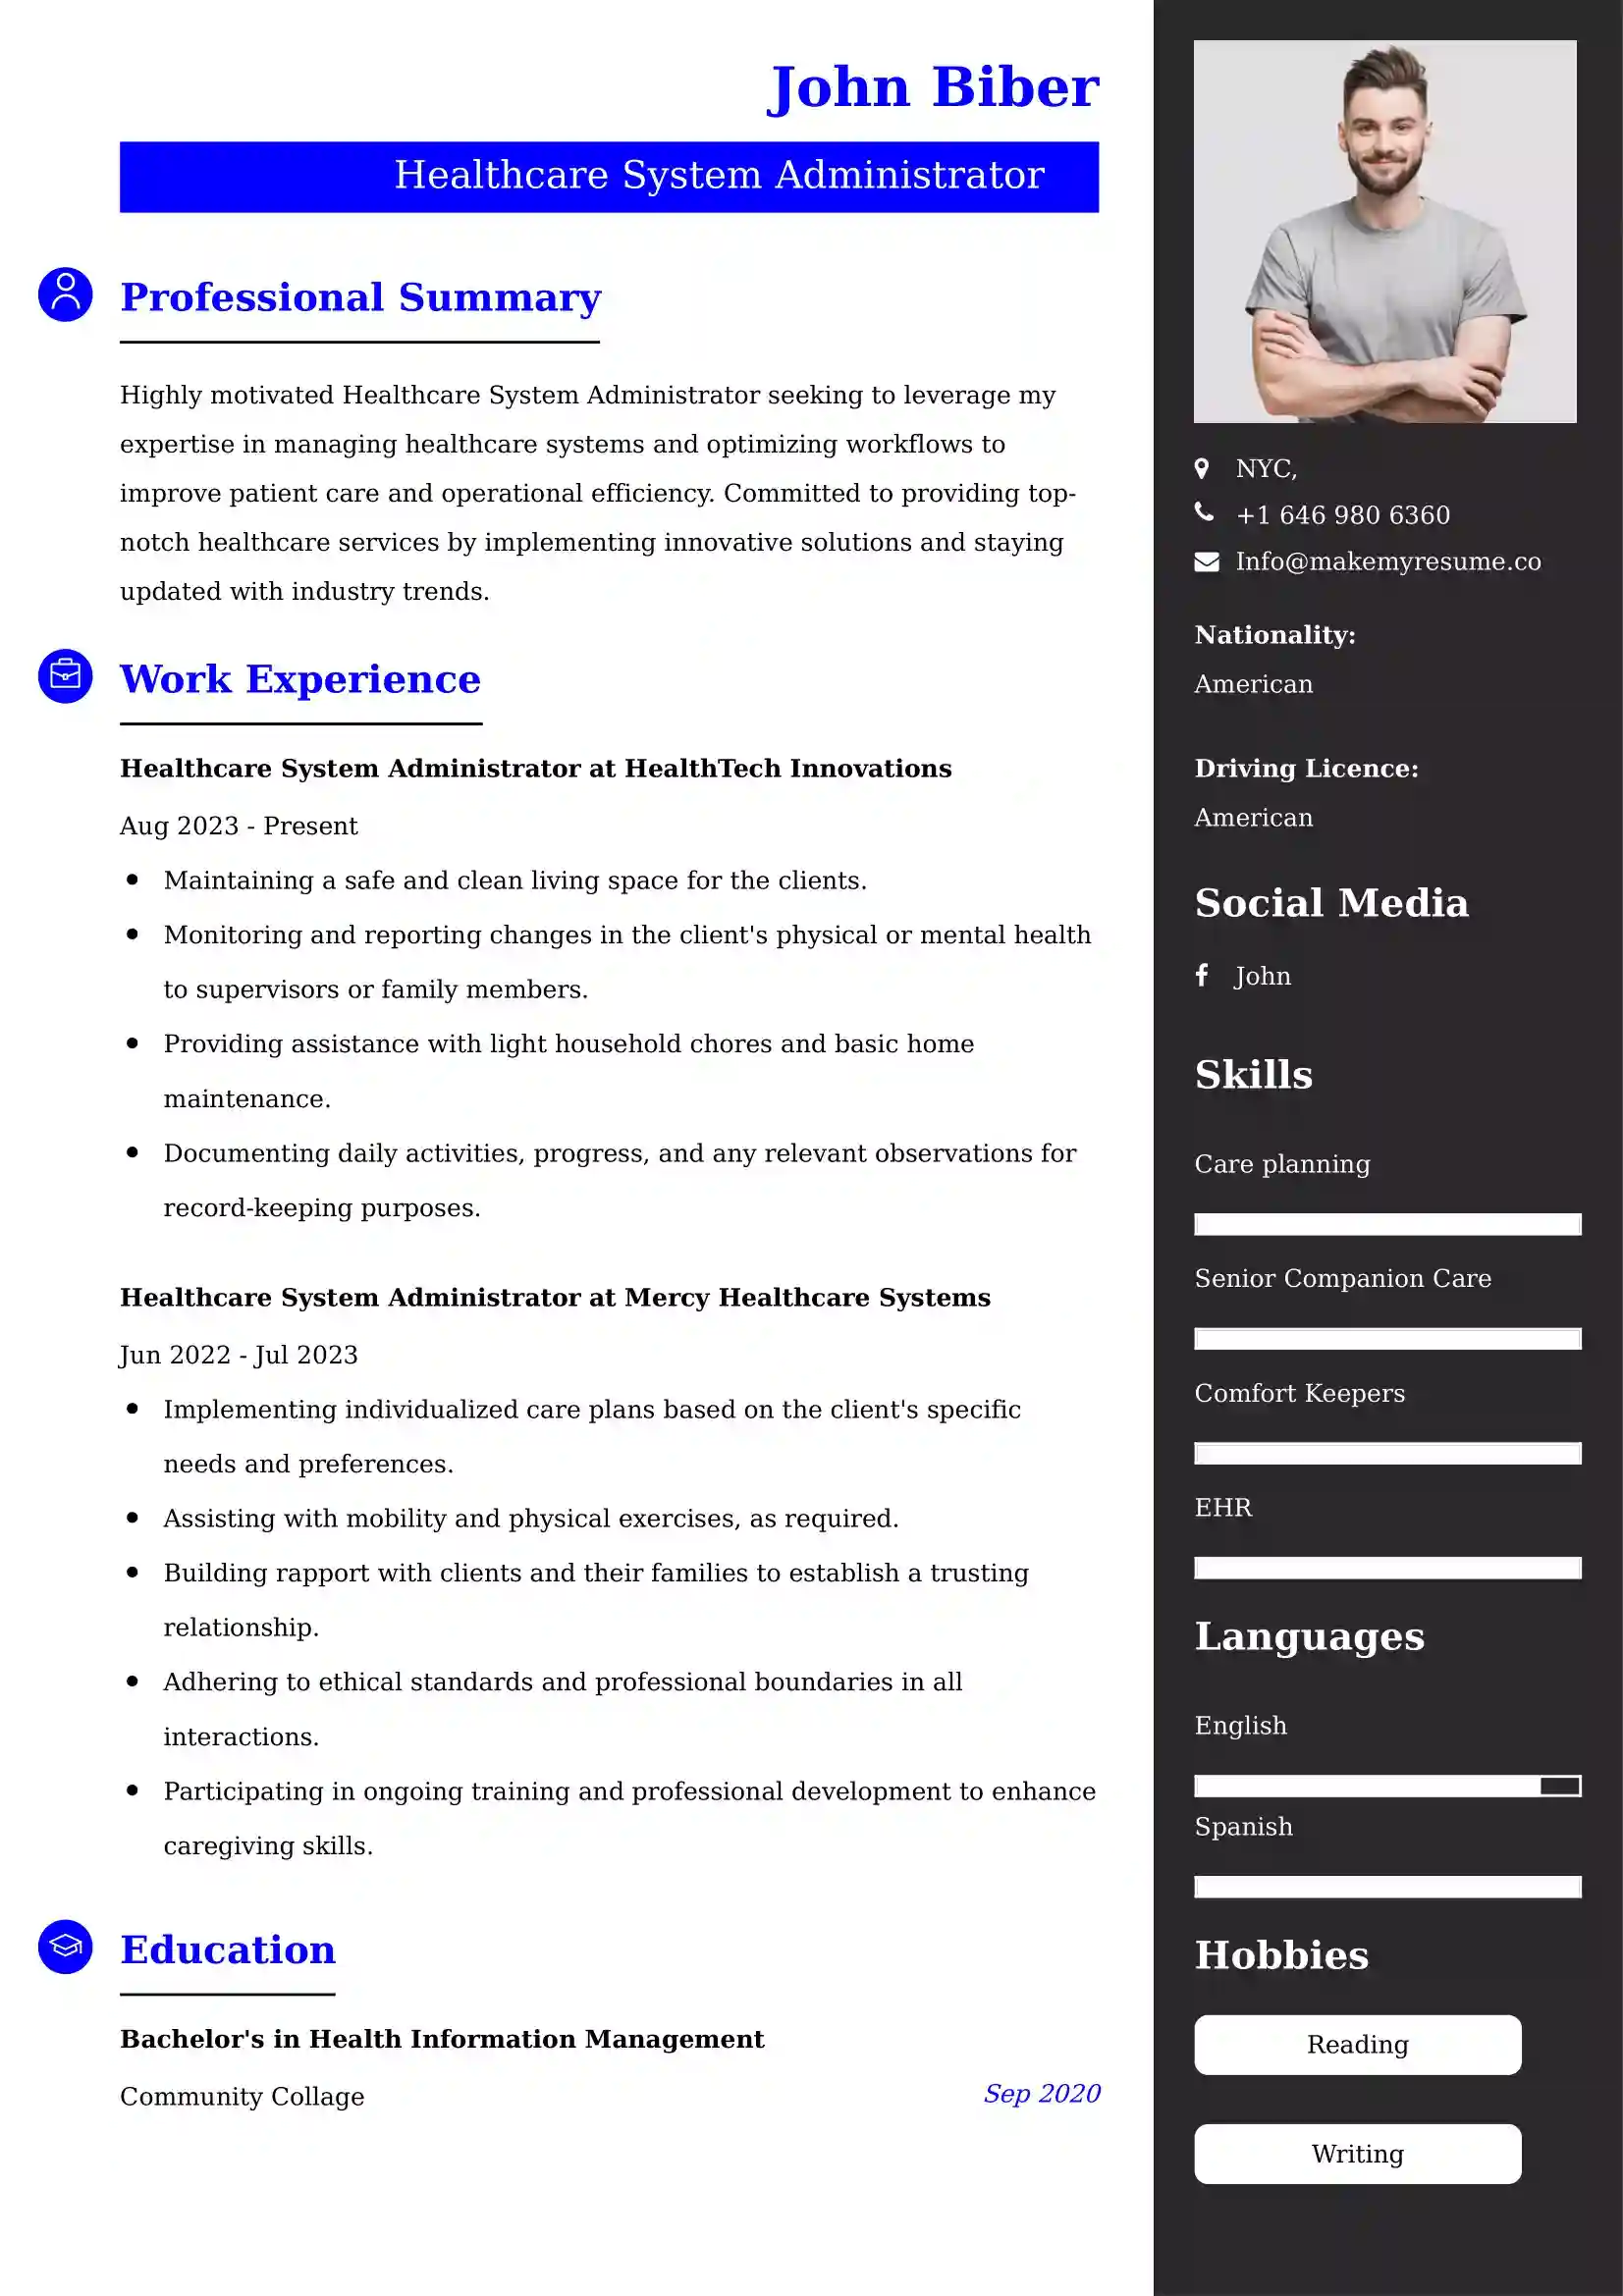 75+ Professional Healthcare and Support Resume Examples, Latest Format